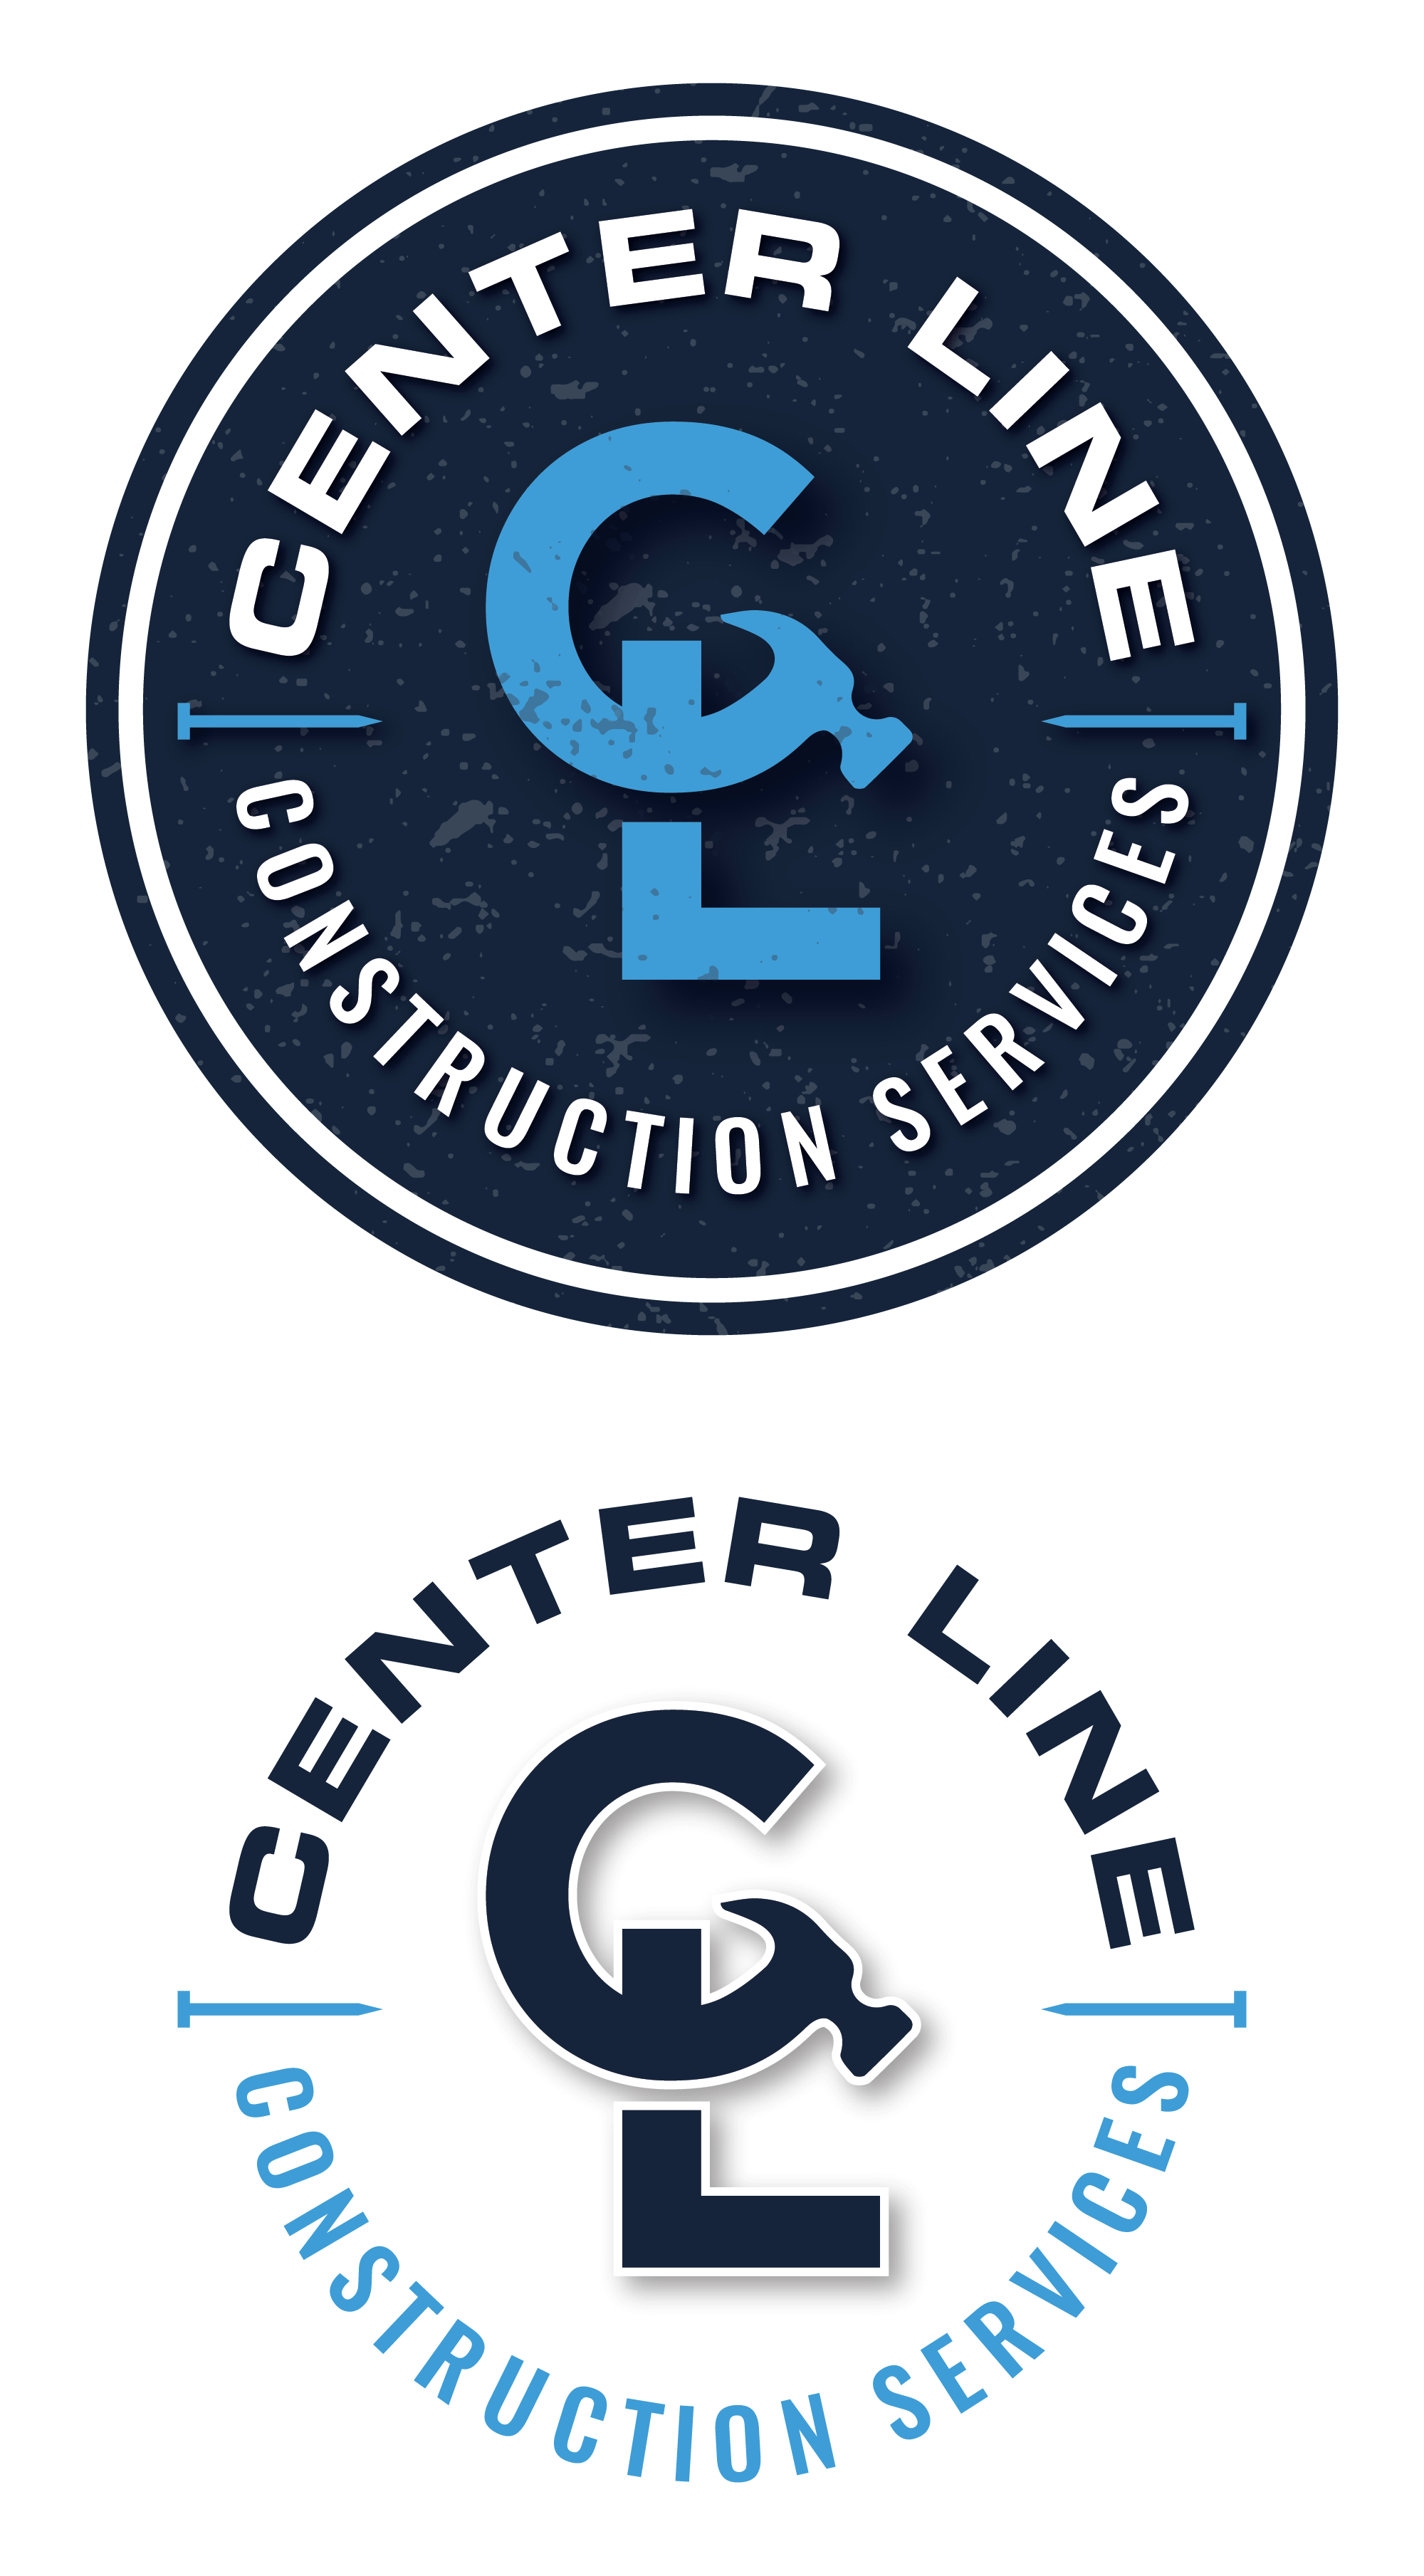 Badge style construction logo designed for Center Line Construction Services